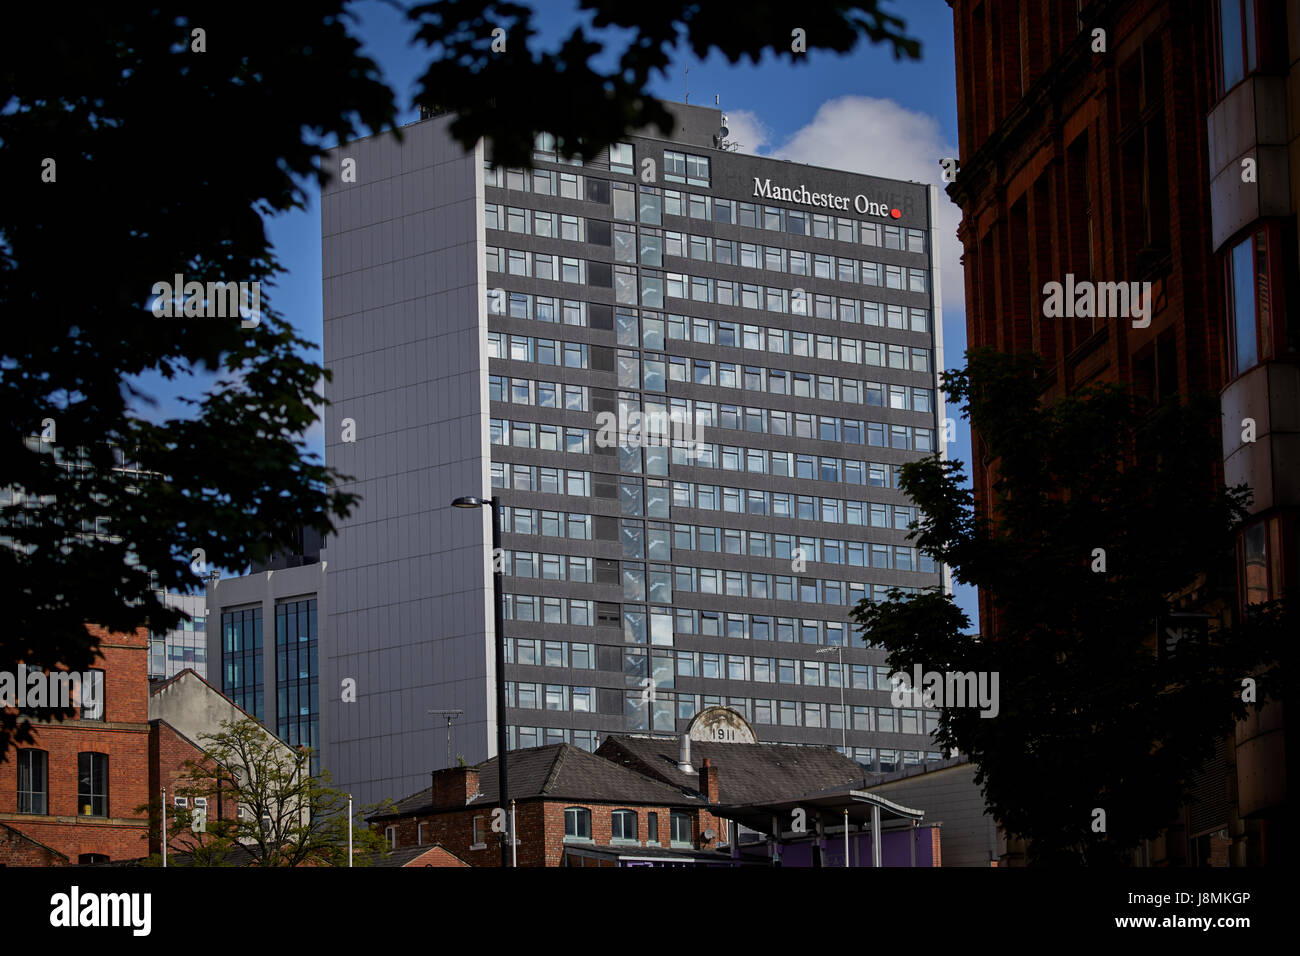 Manchester One, formerly known as Portland Tower and previously St. Andrew's House, is a high-rise building in Manchester, England, owned by Bruntwood Stock Photo